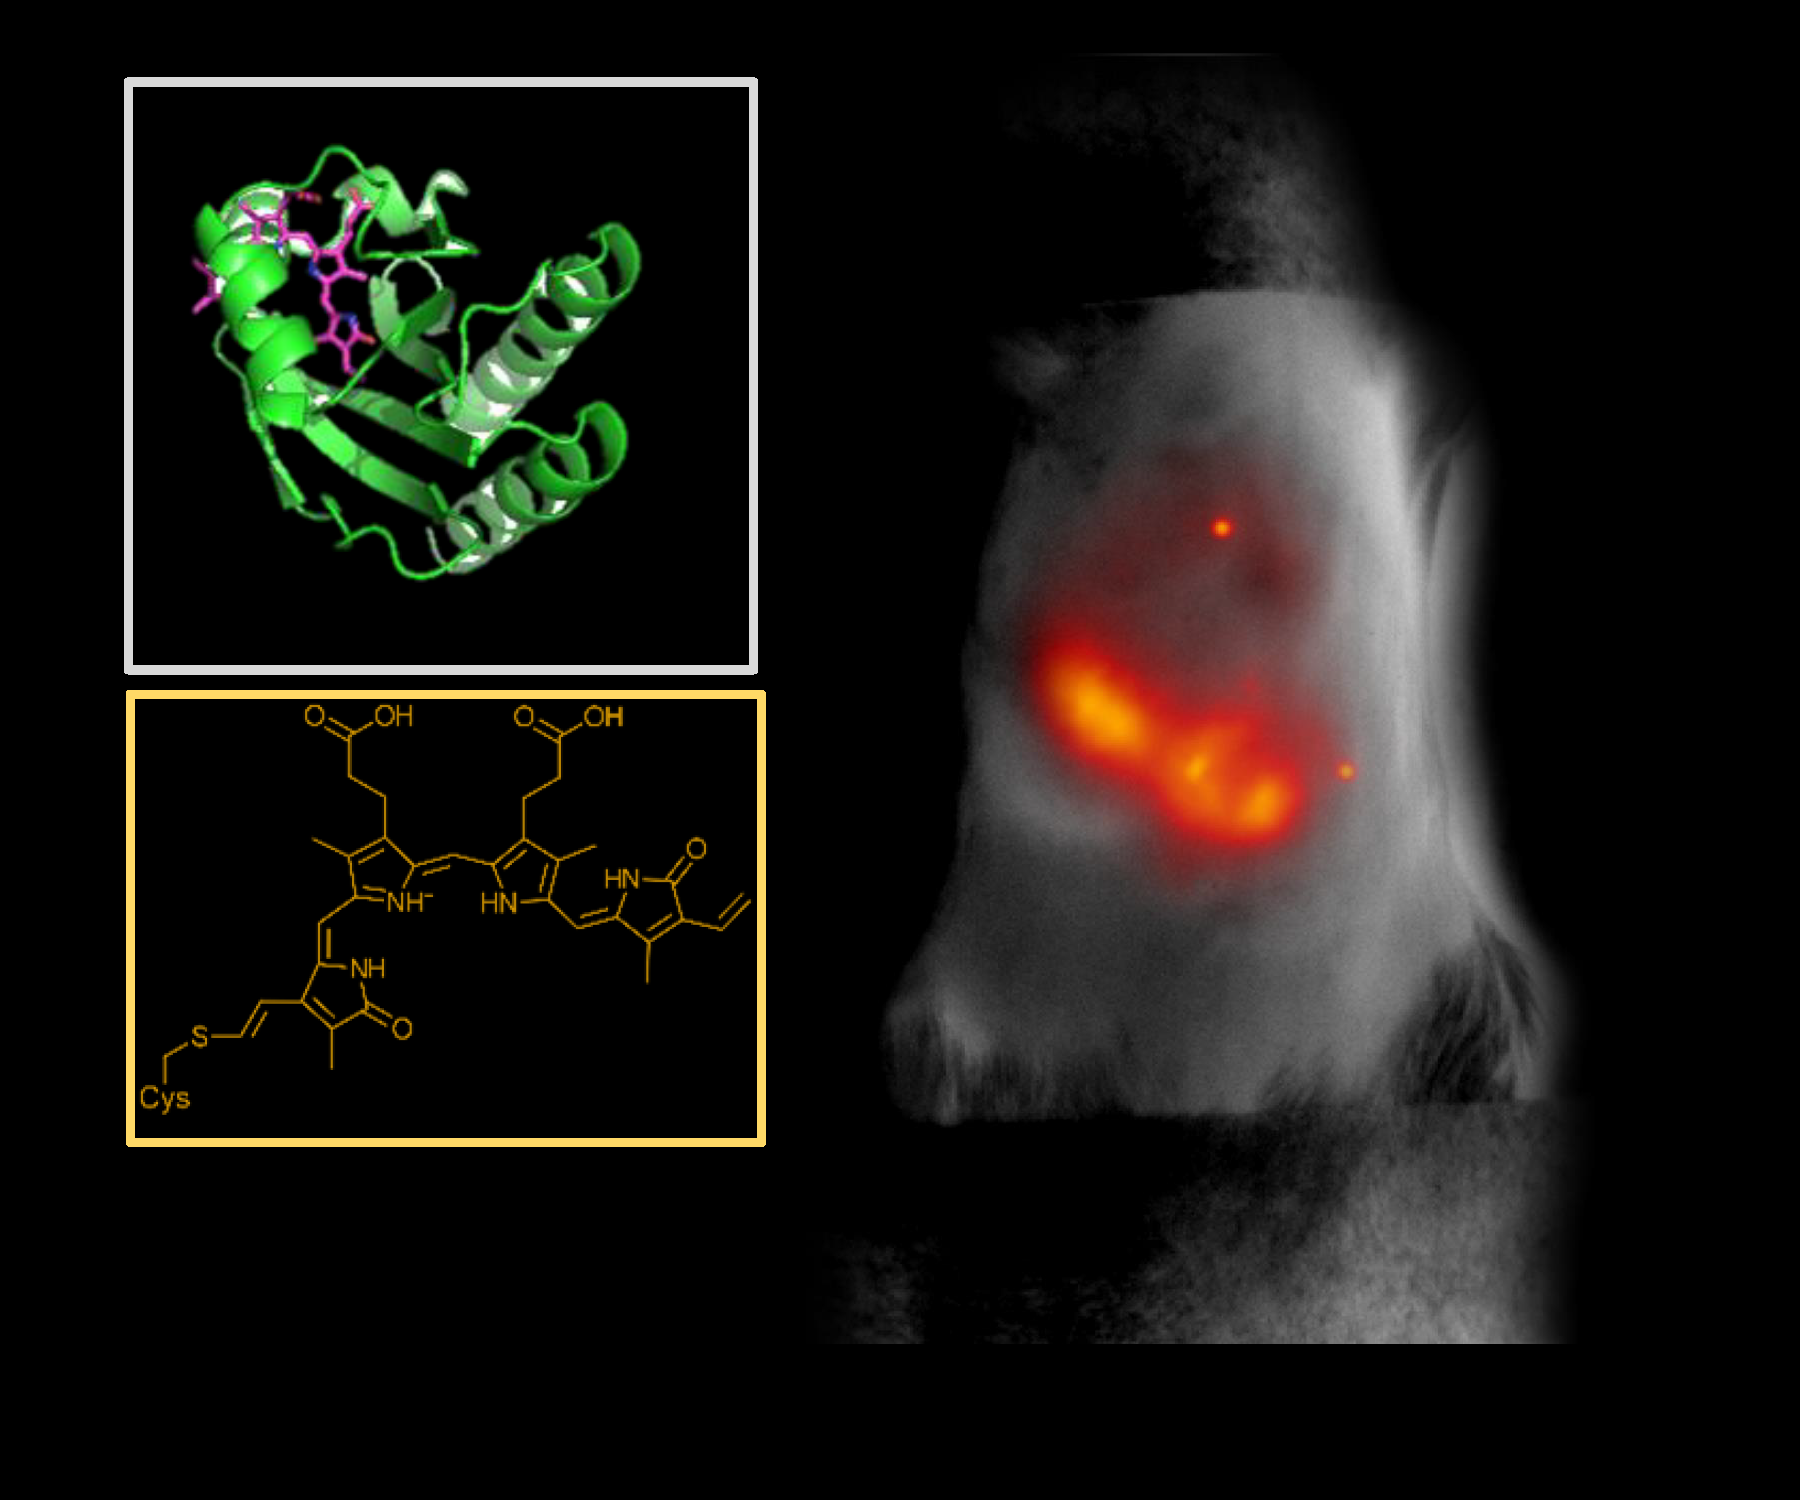 The image shows a small fluorescent protein that emits and absorbs light that penetrates deep into biological tissue. Here, it indicates inflammation in a living mouse liver. The inset shows the molecular and chemical structure of the protein, miRFP718nano.